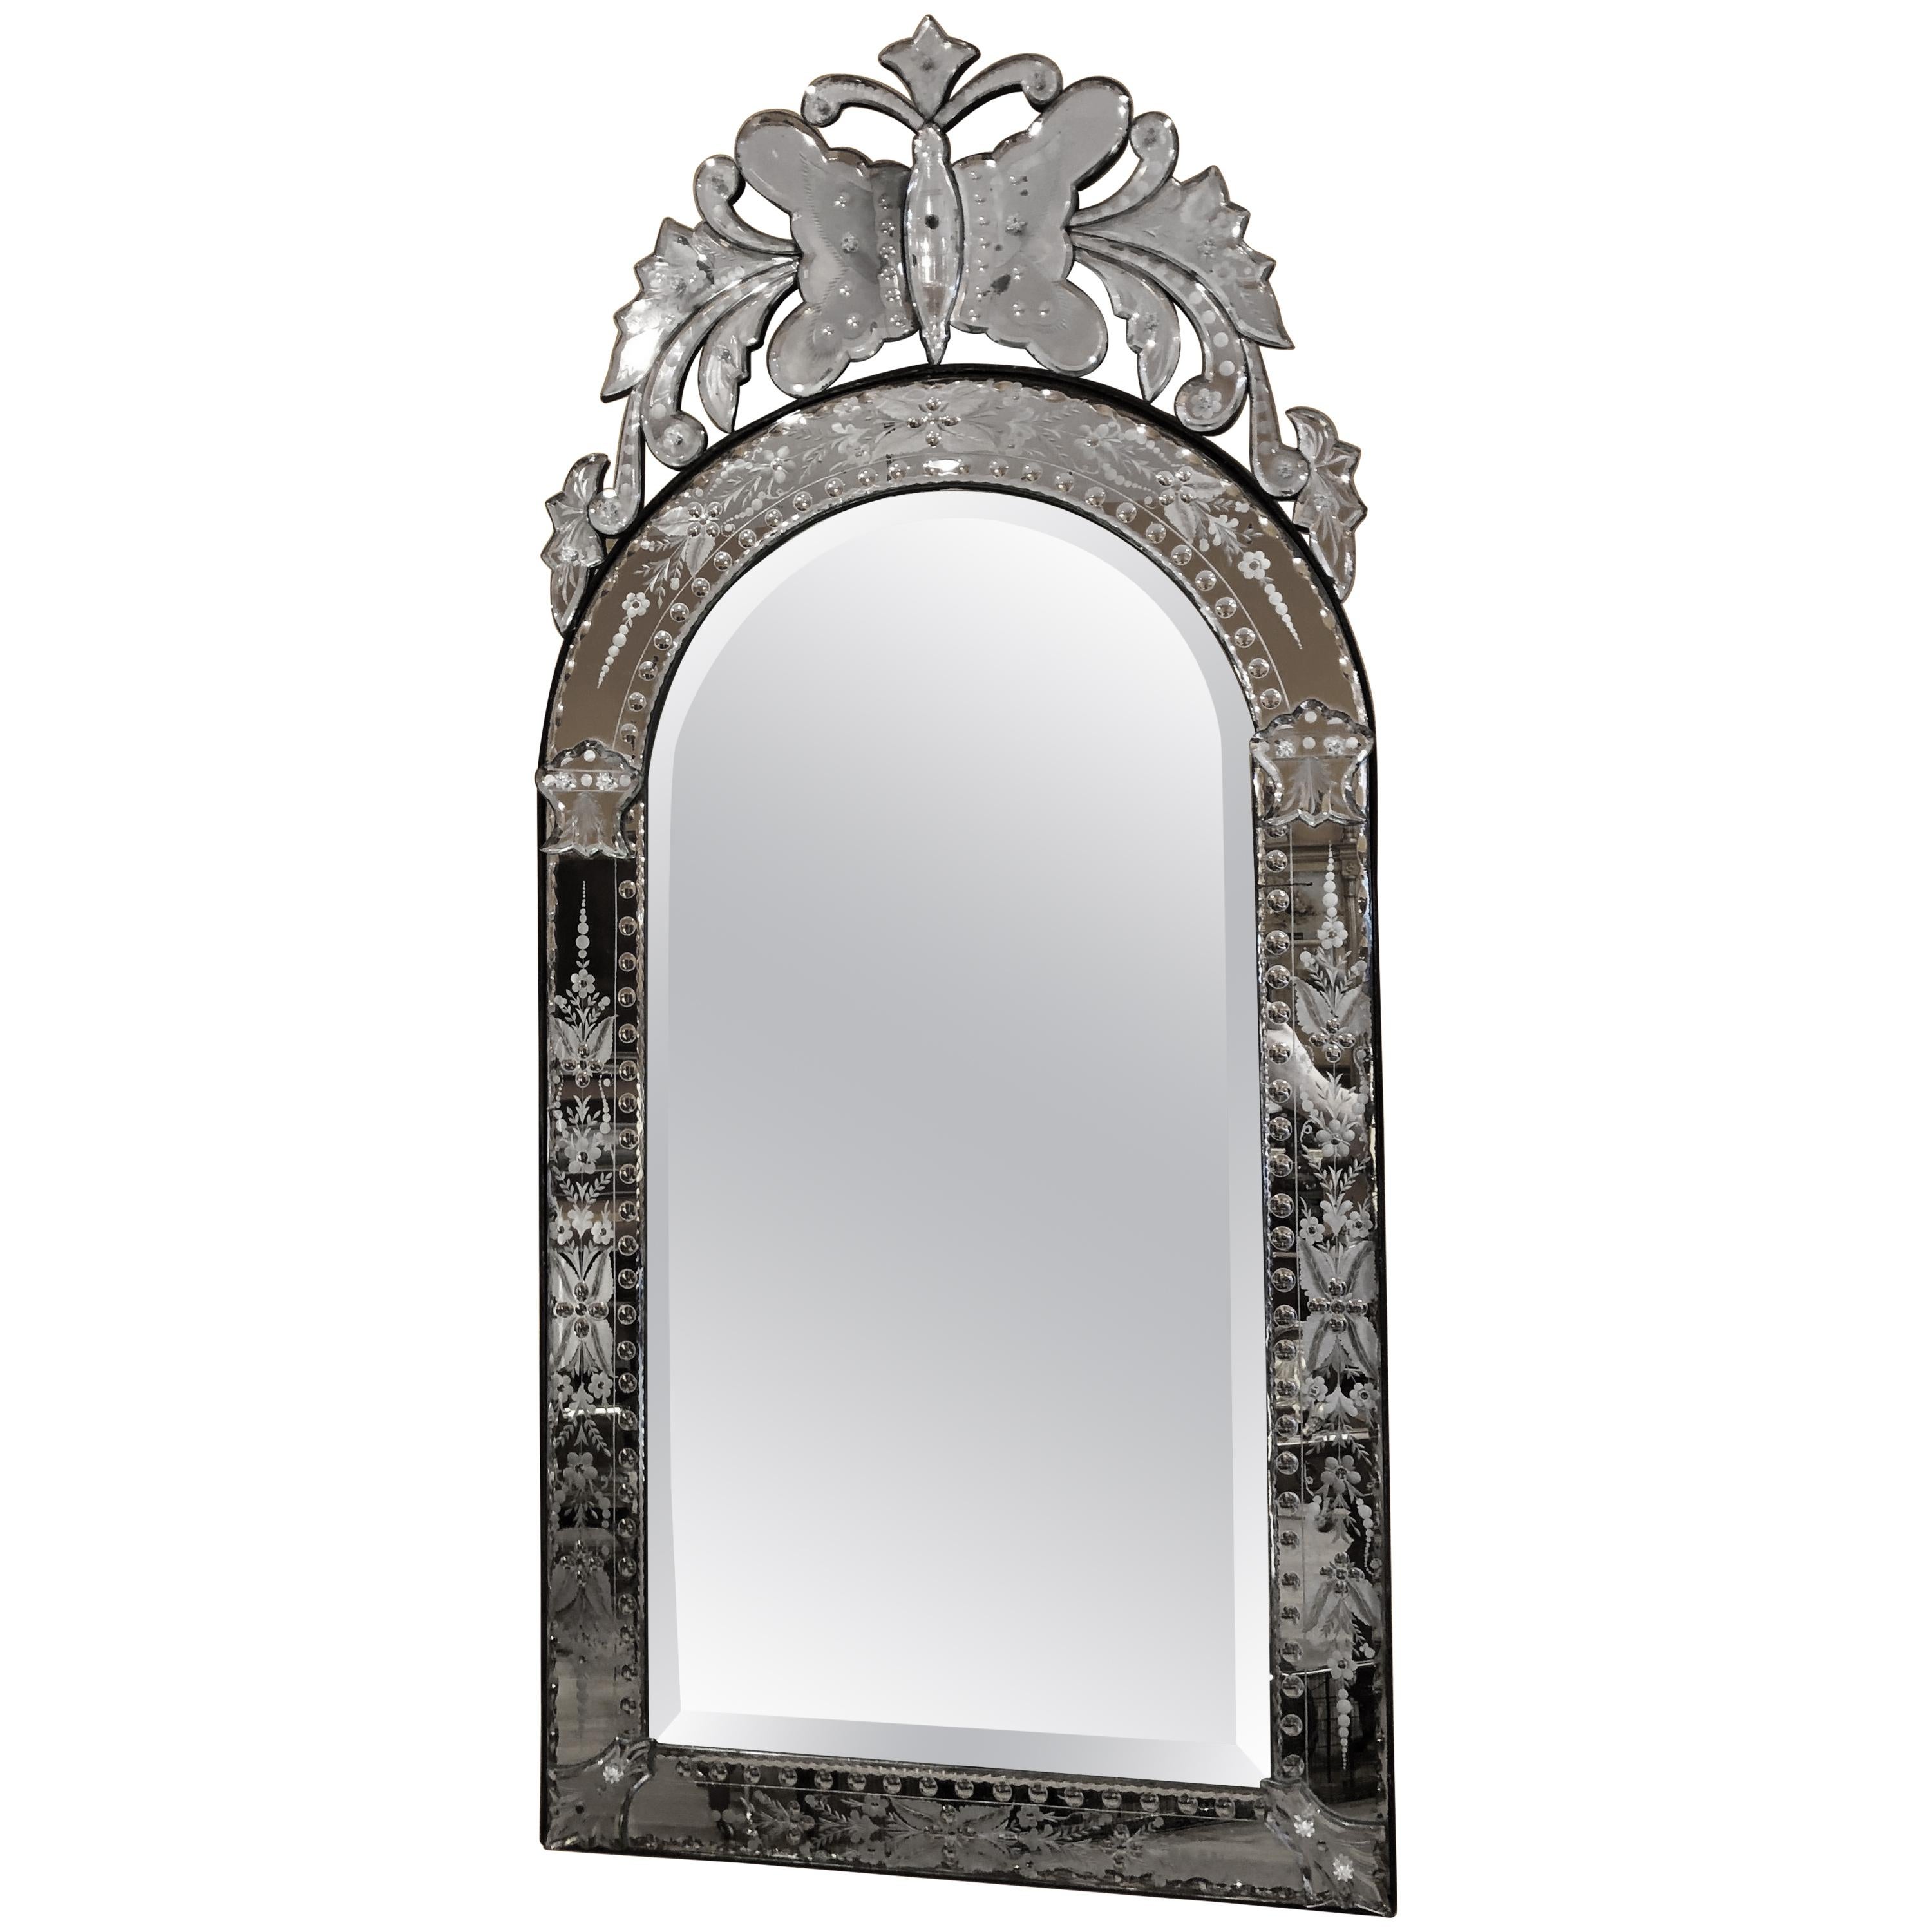 20th Century Venetian Mirror with Butterfly Motif